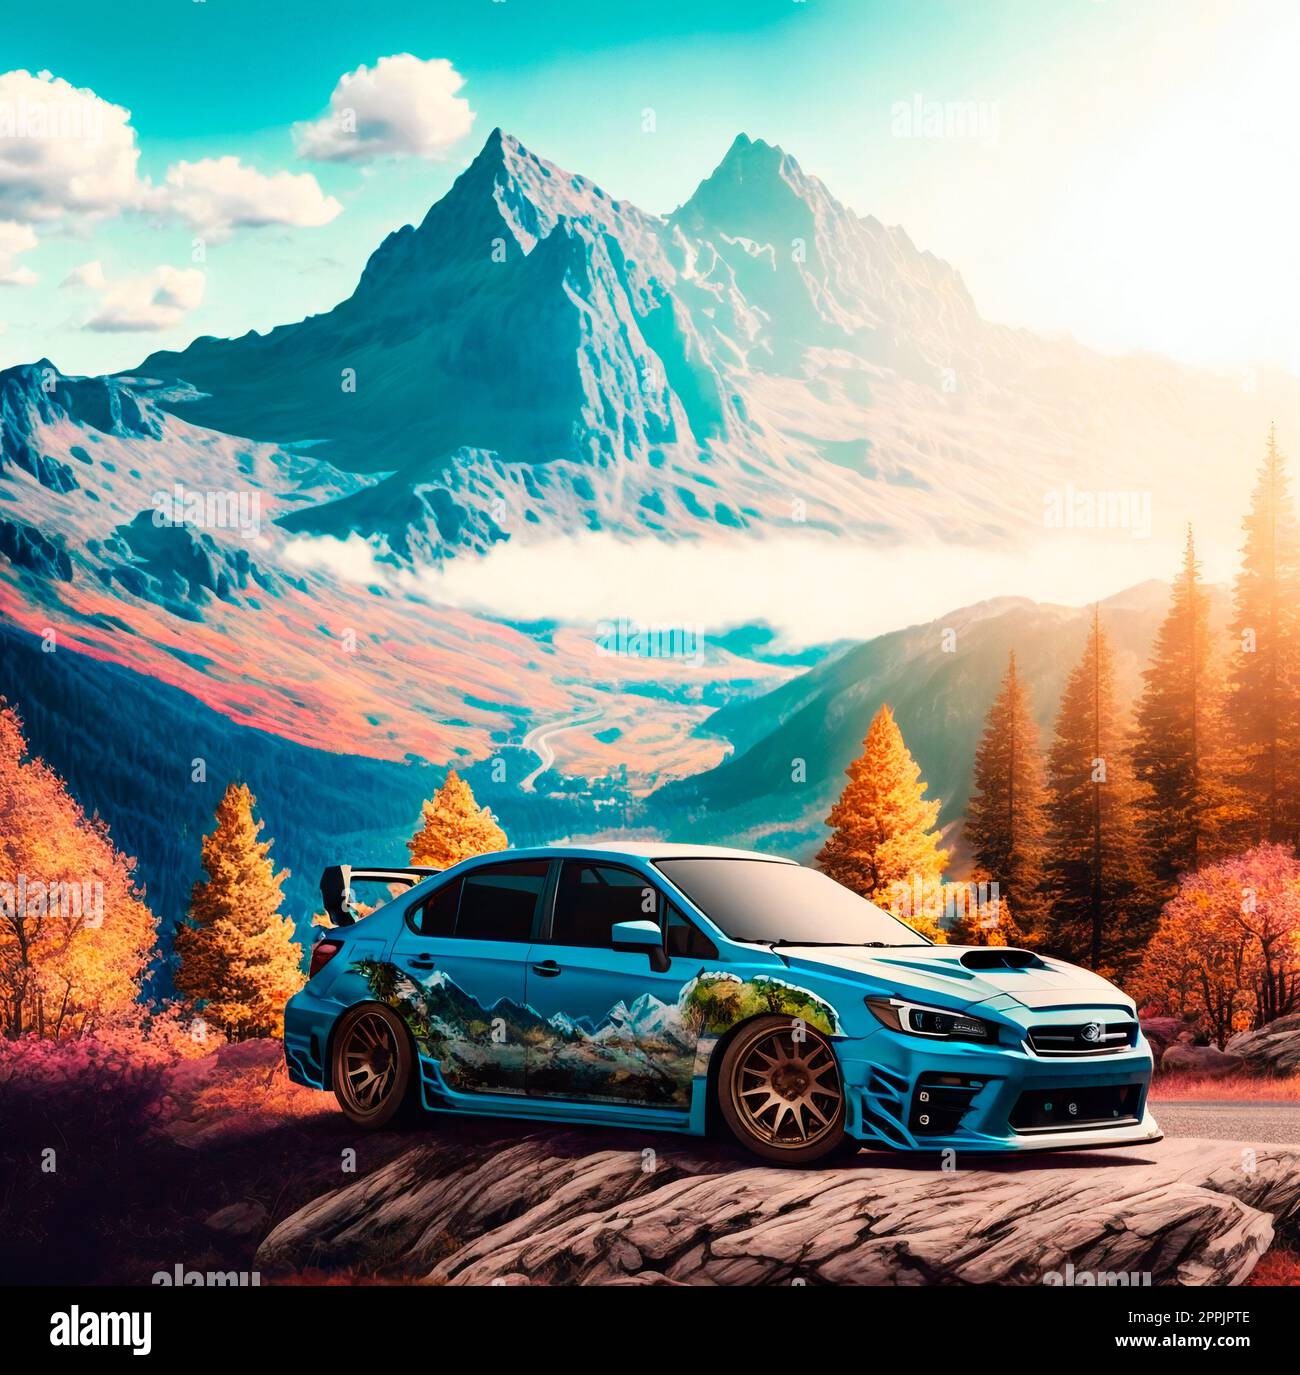 This image captures the beauty of a mountain landscape with a Subaru Stock Photo